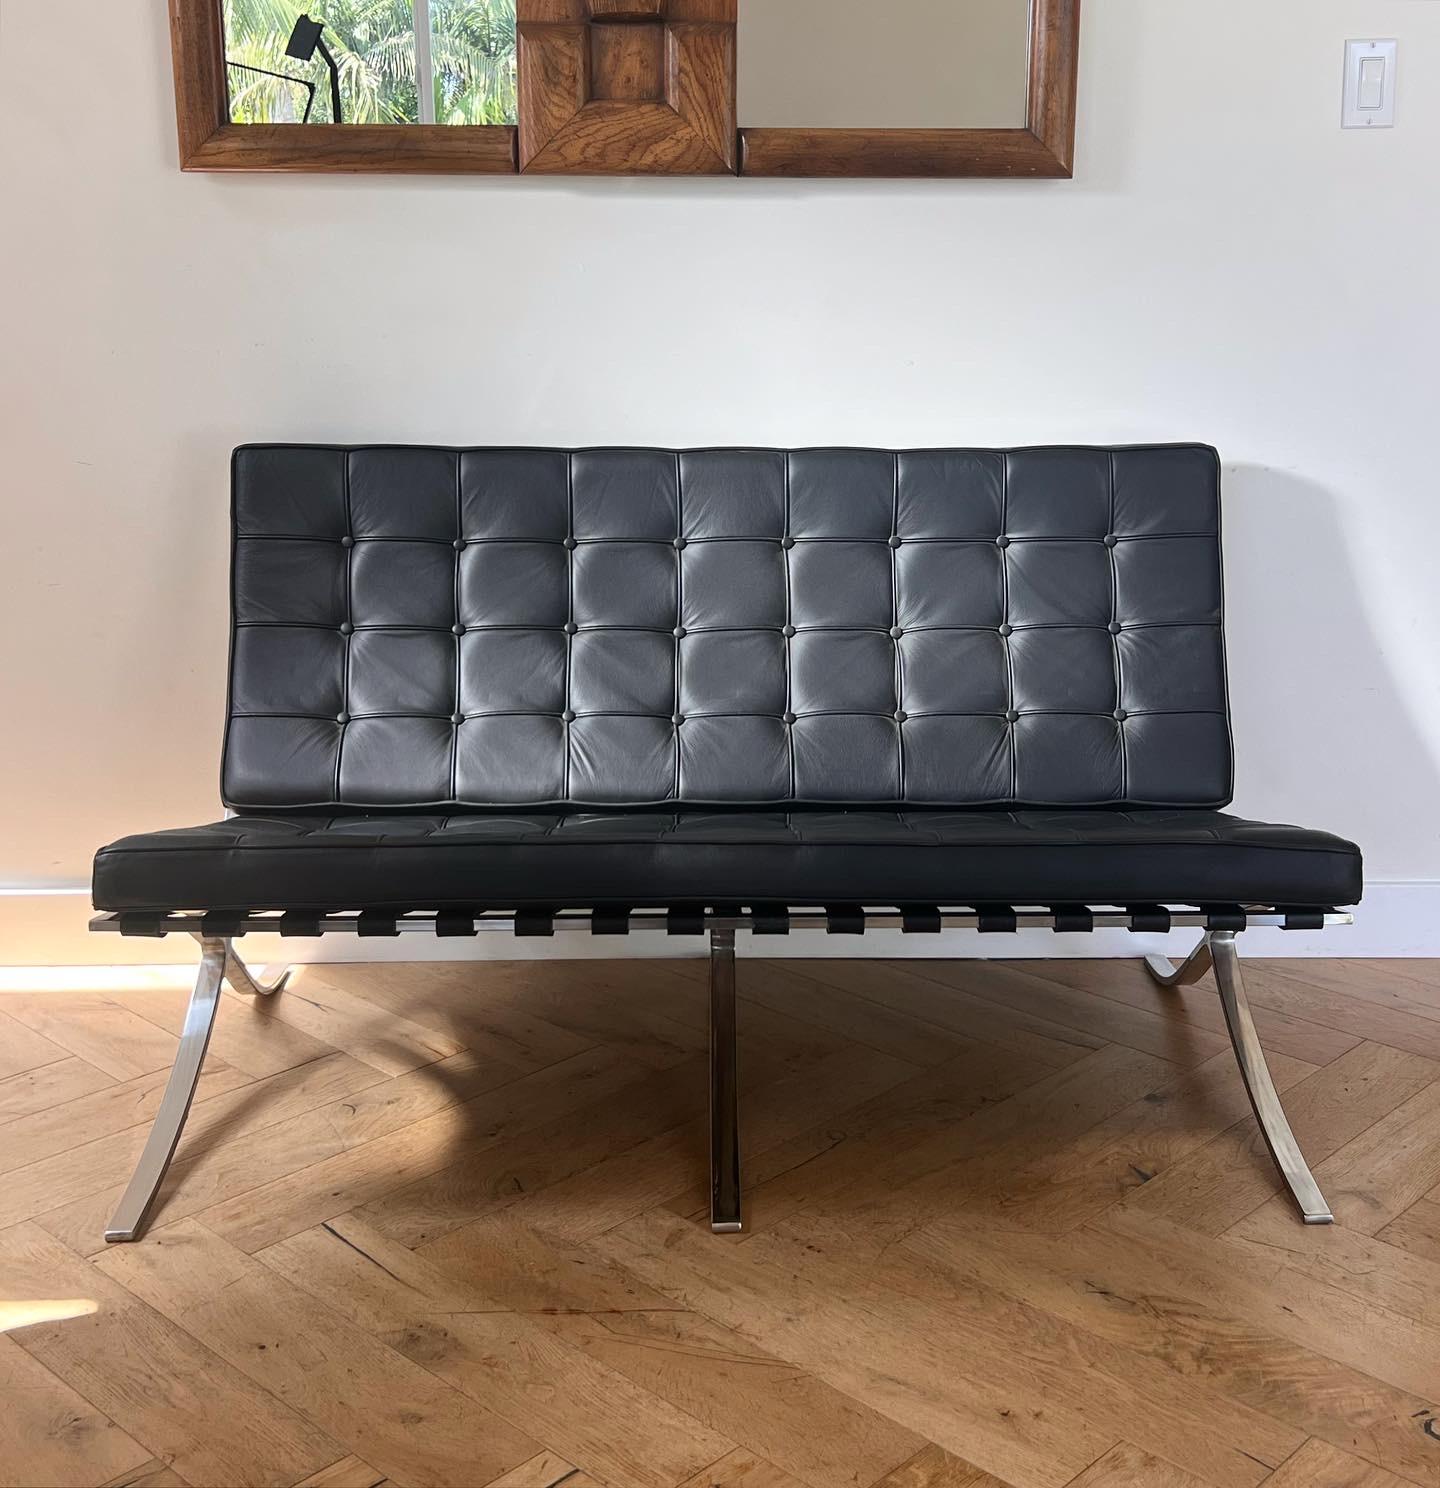 A very high-end 1980s replica of the iconic Barcelona sofa designed by Mies van der Rohe in the 1920s and later manufactured by Knoll. Featuring superb quality vegan leather in licorice black and a chrome base which recalls ancient Egyptian seating.